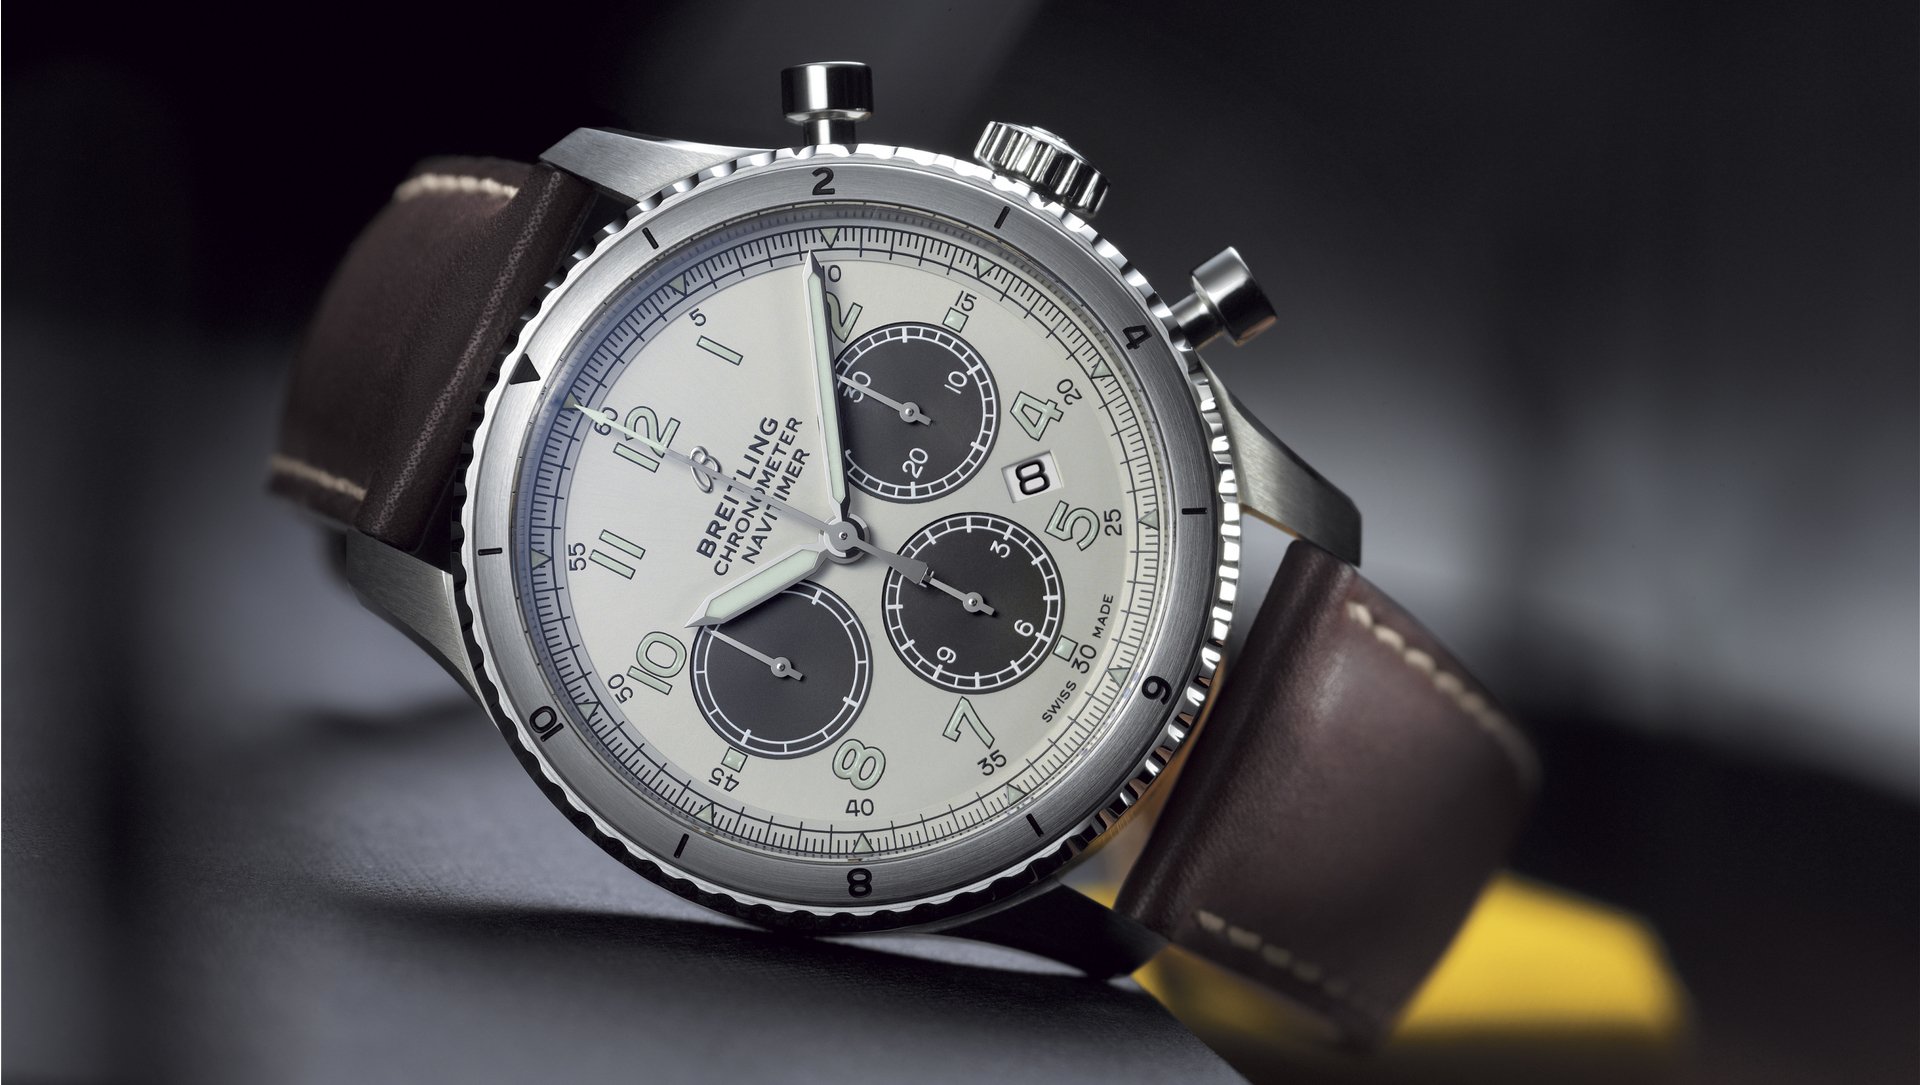 The anthracite chronograph sub-dials are contrasting to the silvery dial.